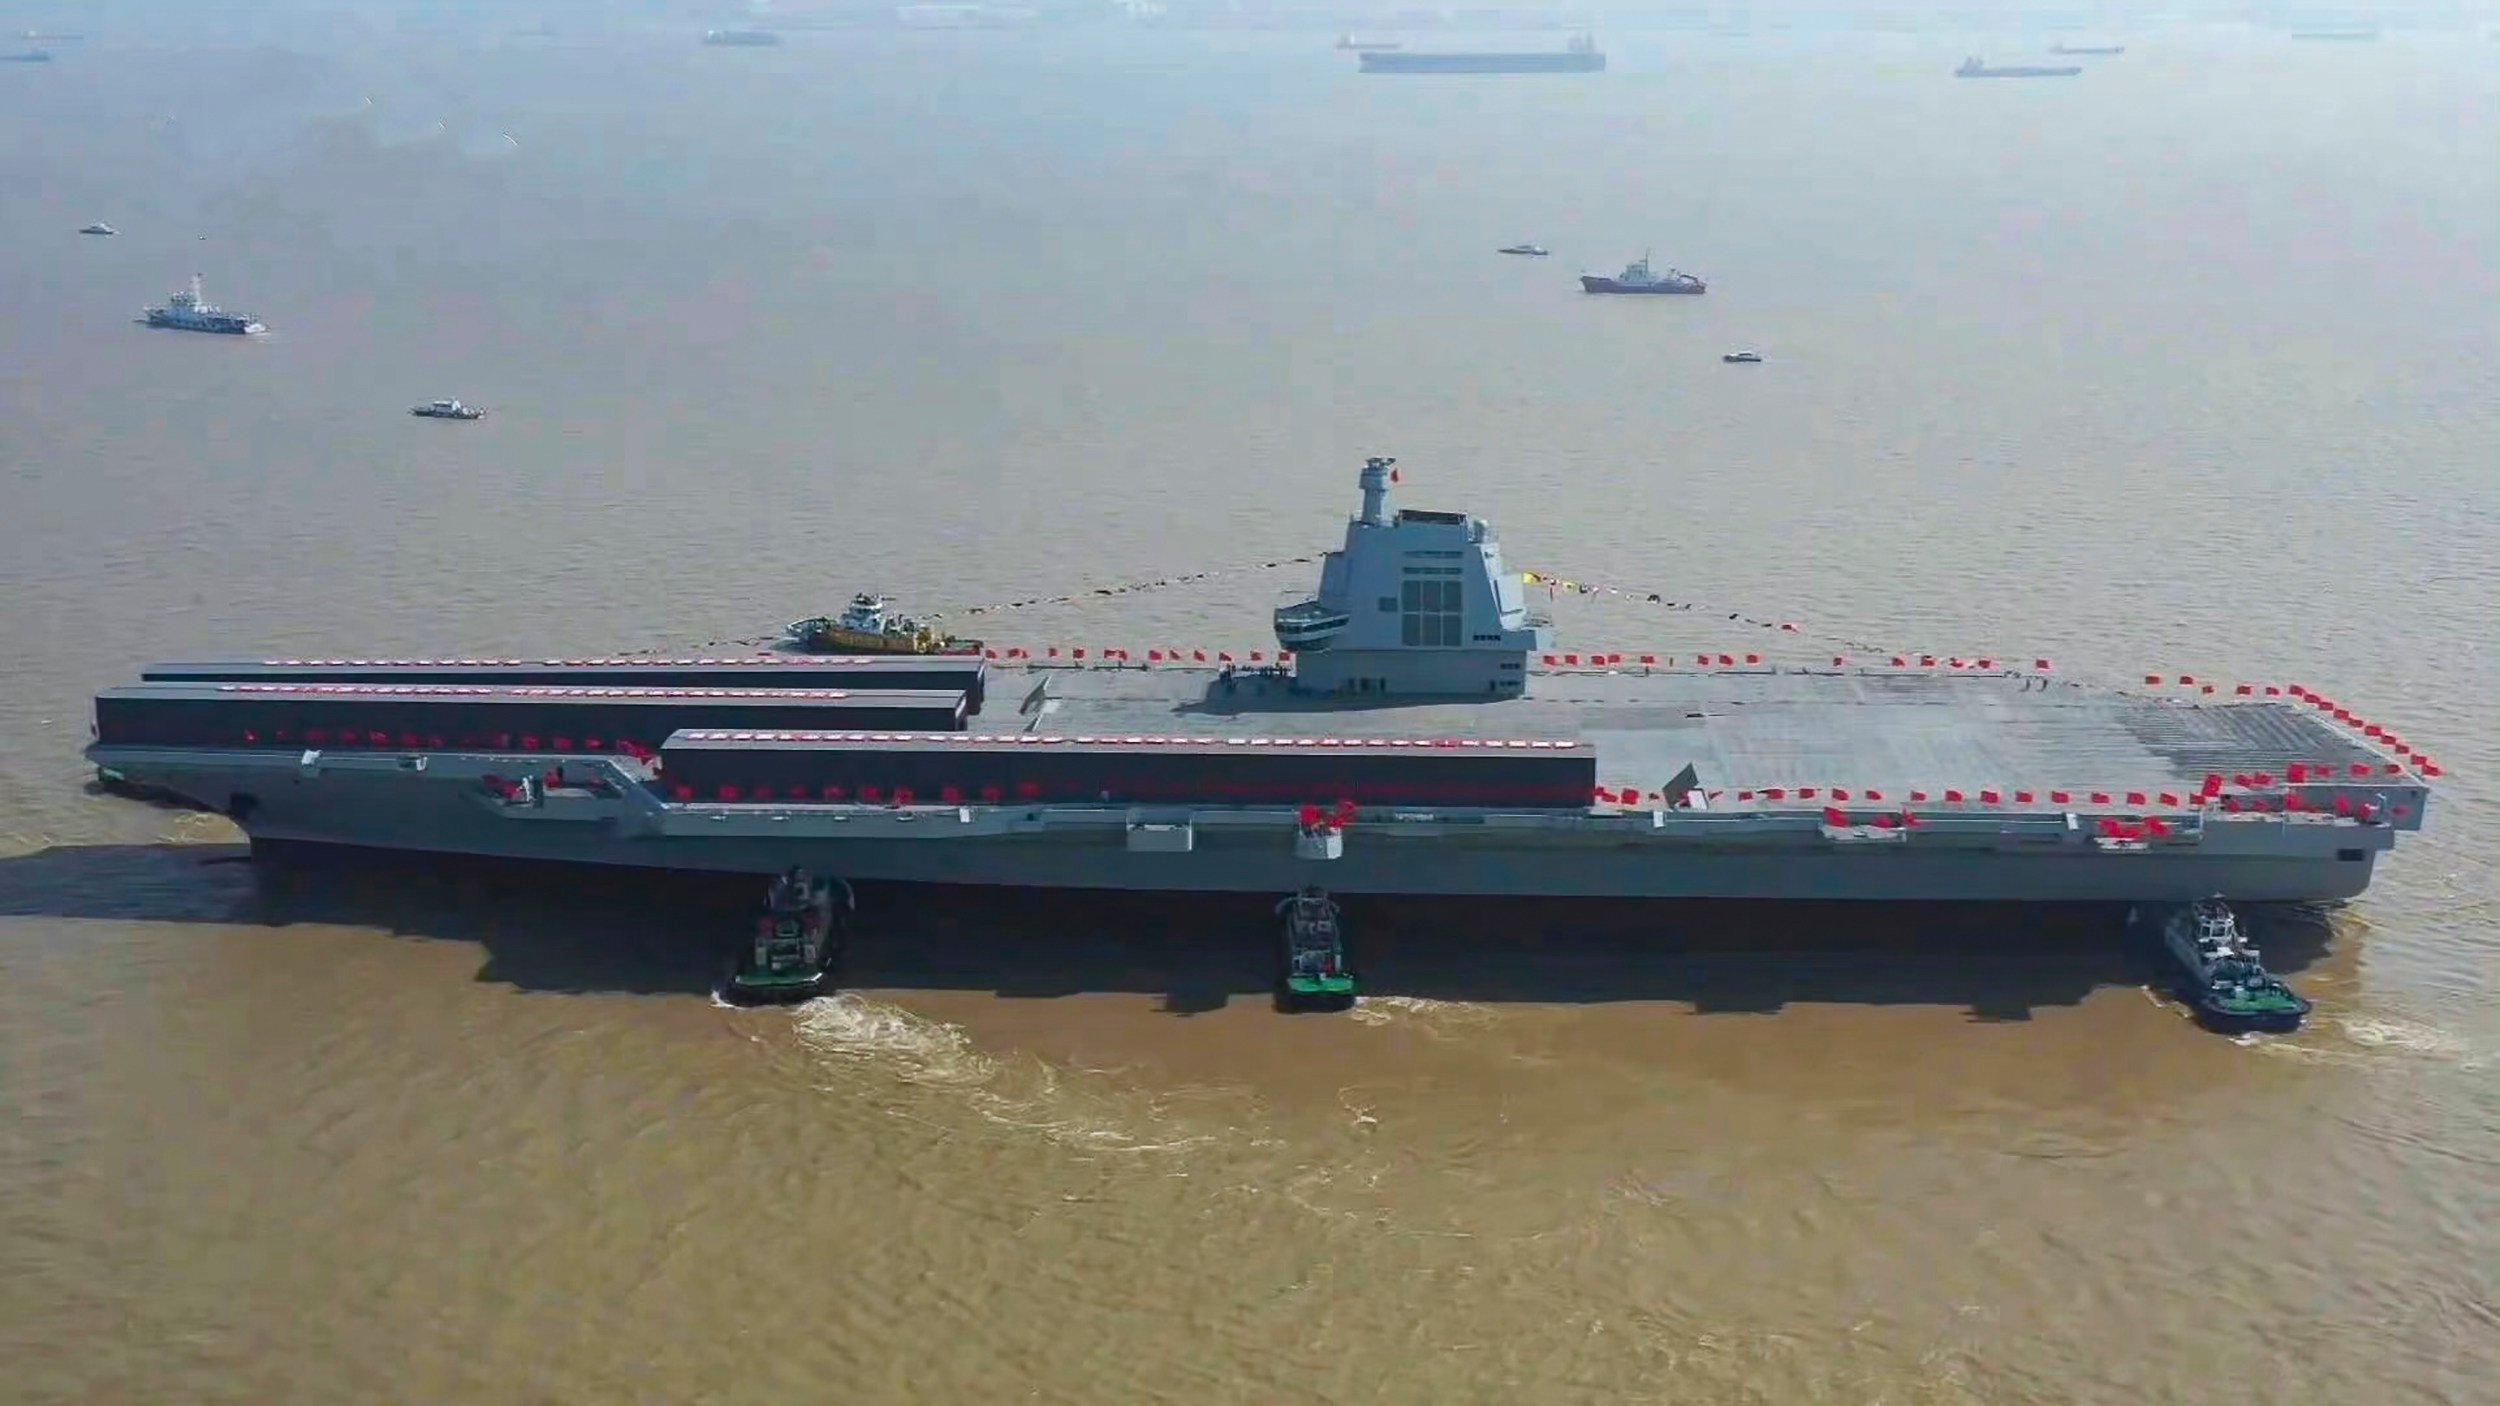 The Fujian, which was launched in June, is by far China’s biggest, most modern and most powerful aircraft carrier. Photo: Weibo